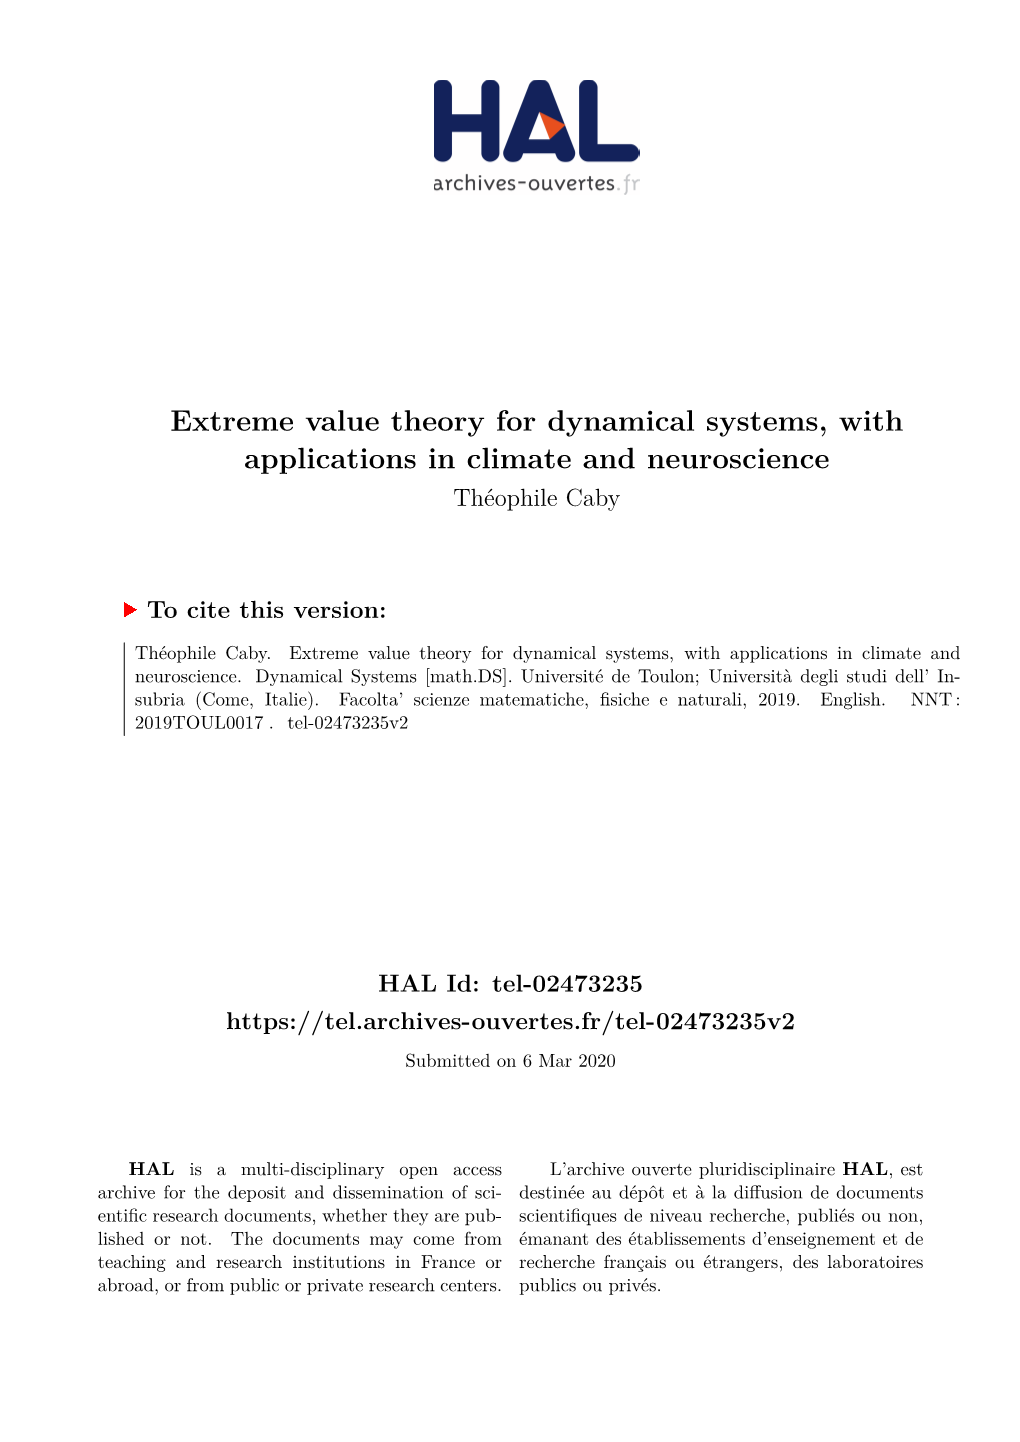 Extreme Value Theory for Dynamical Systems, with Applications in Climate and Neuroscience Théophile Caby